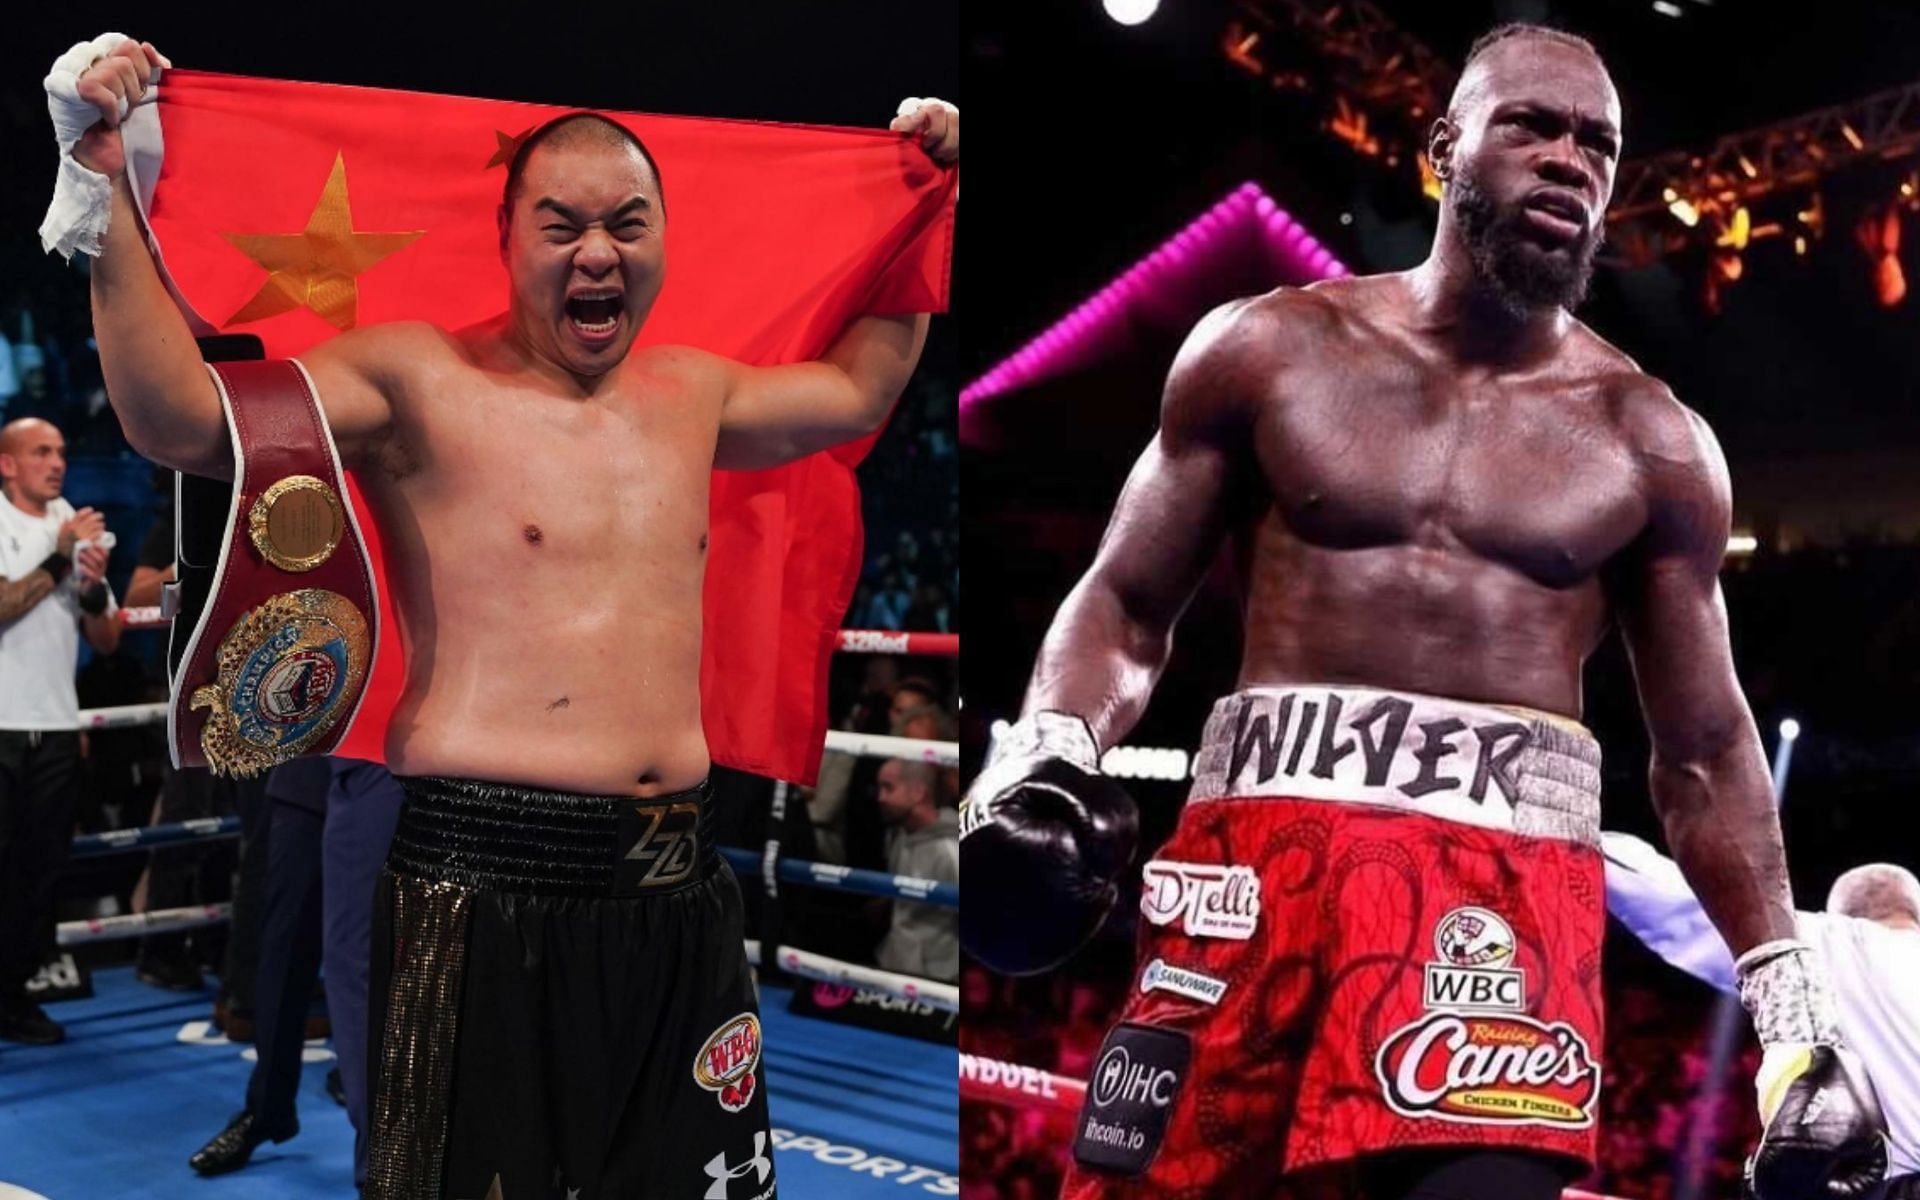 Zhilei Zhang and Deontay Wilder might meet in March. [Images courtesy of @zhileibigbangzhang and @bronzebomber on Instagram]